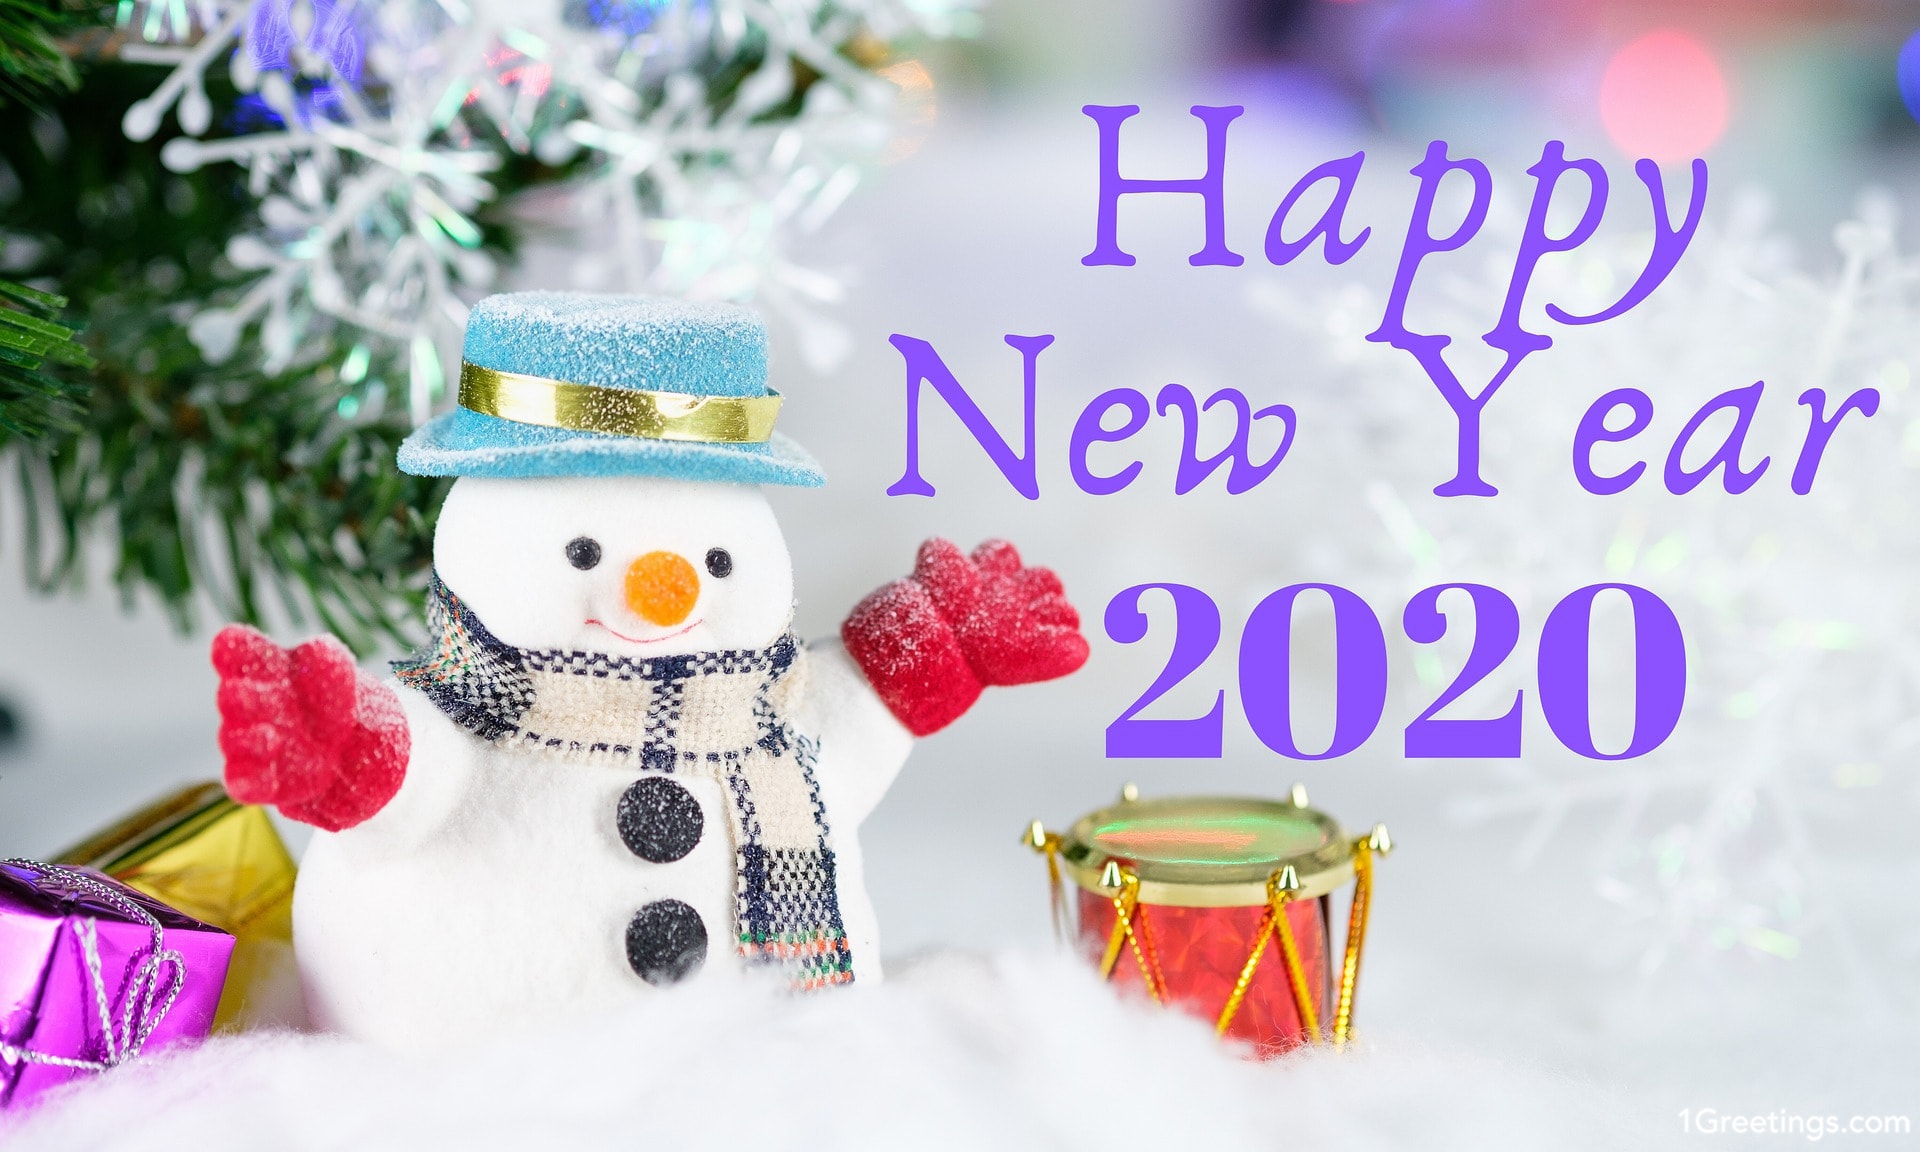 Download New Year 2020 wallpapers to your desktop for free